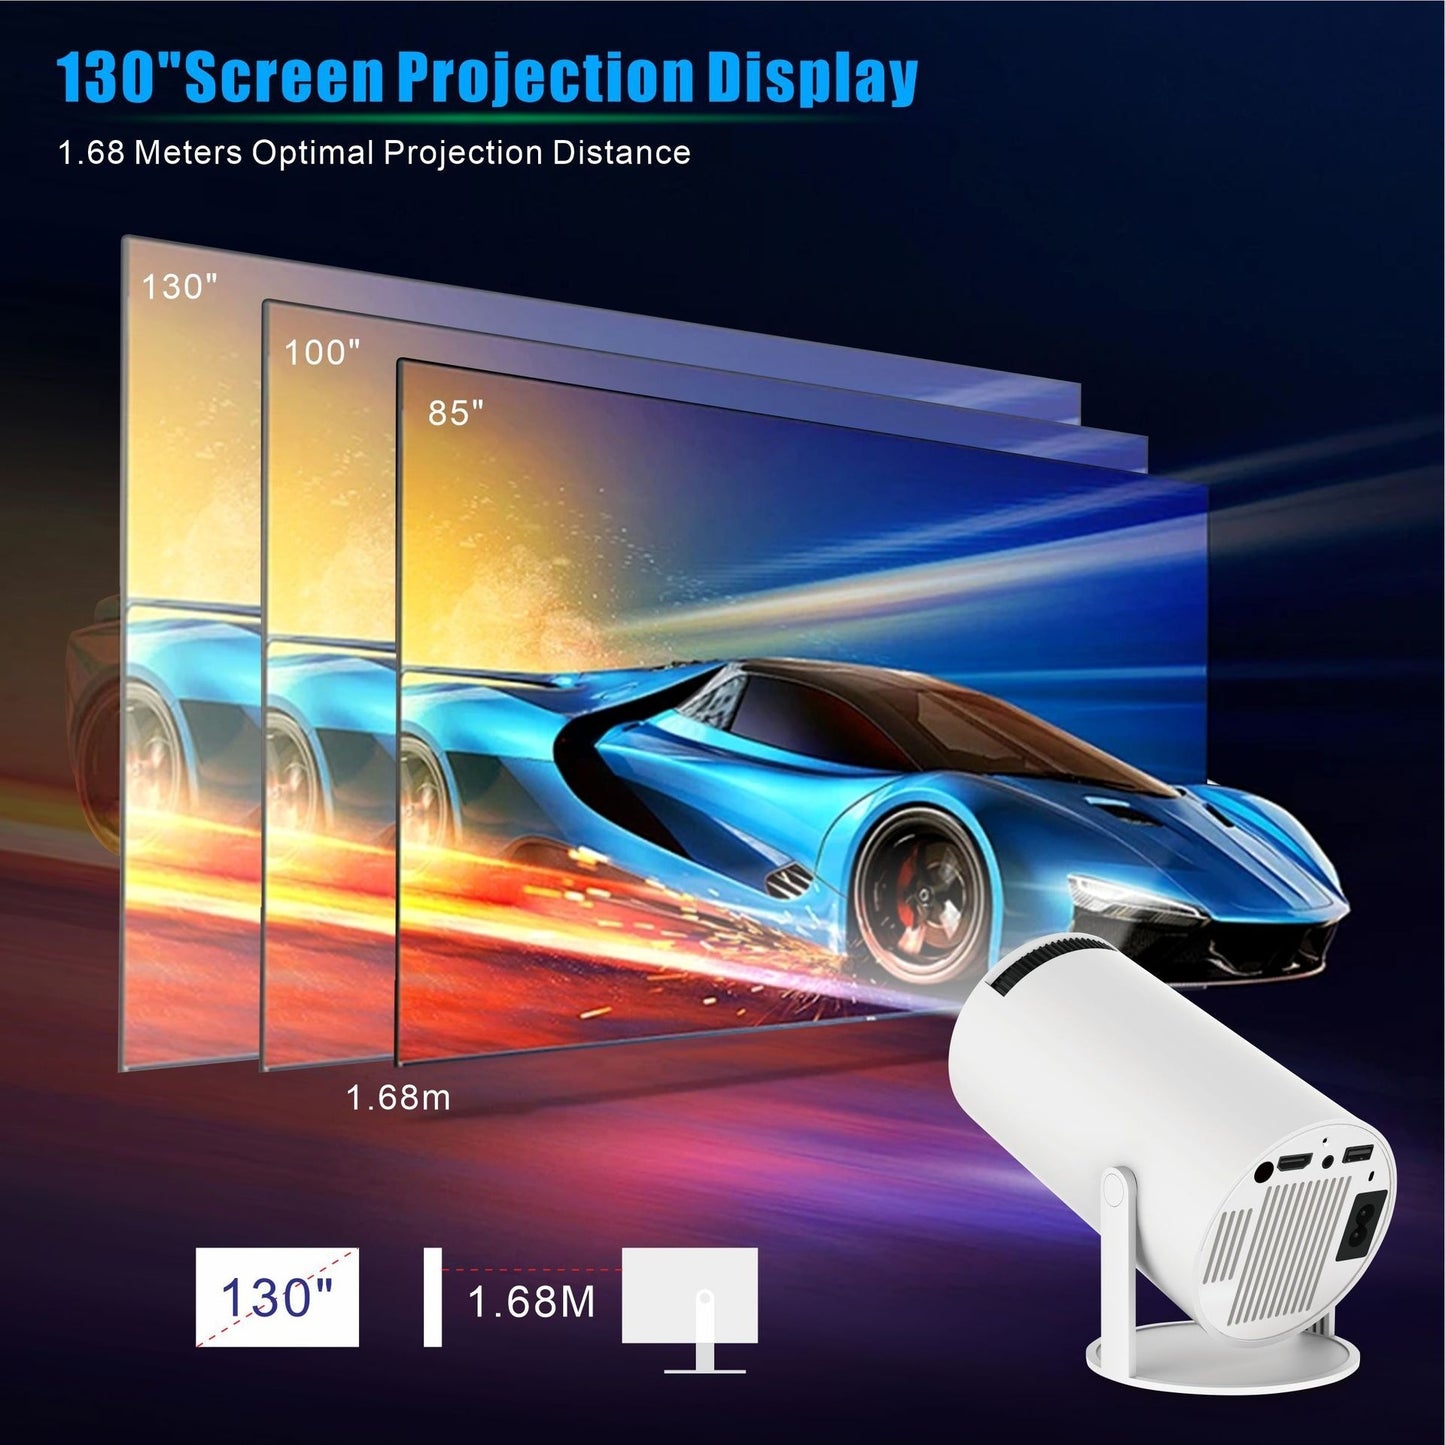 The AwesomeVision Smart™ Home 4K Portable Projector